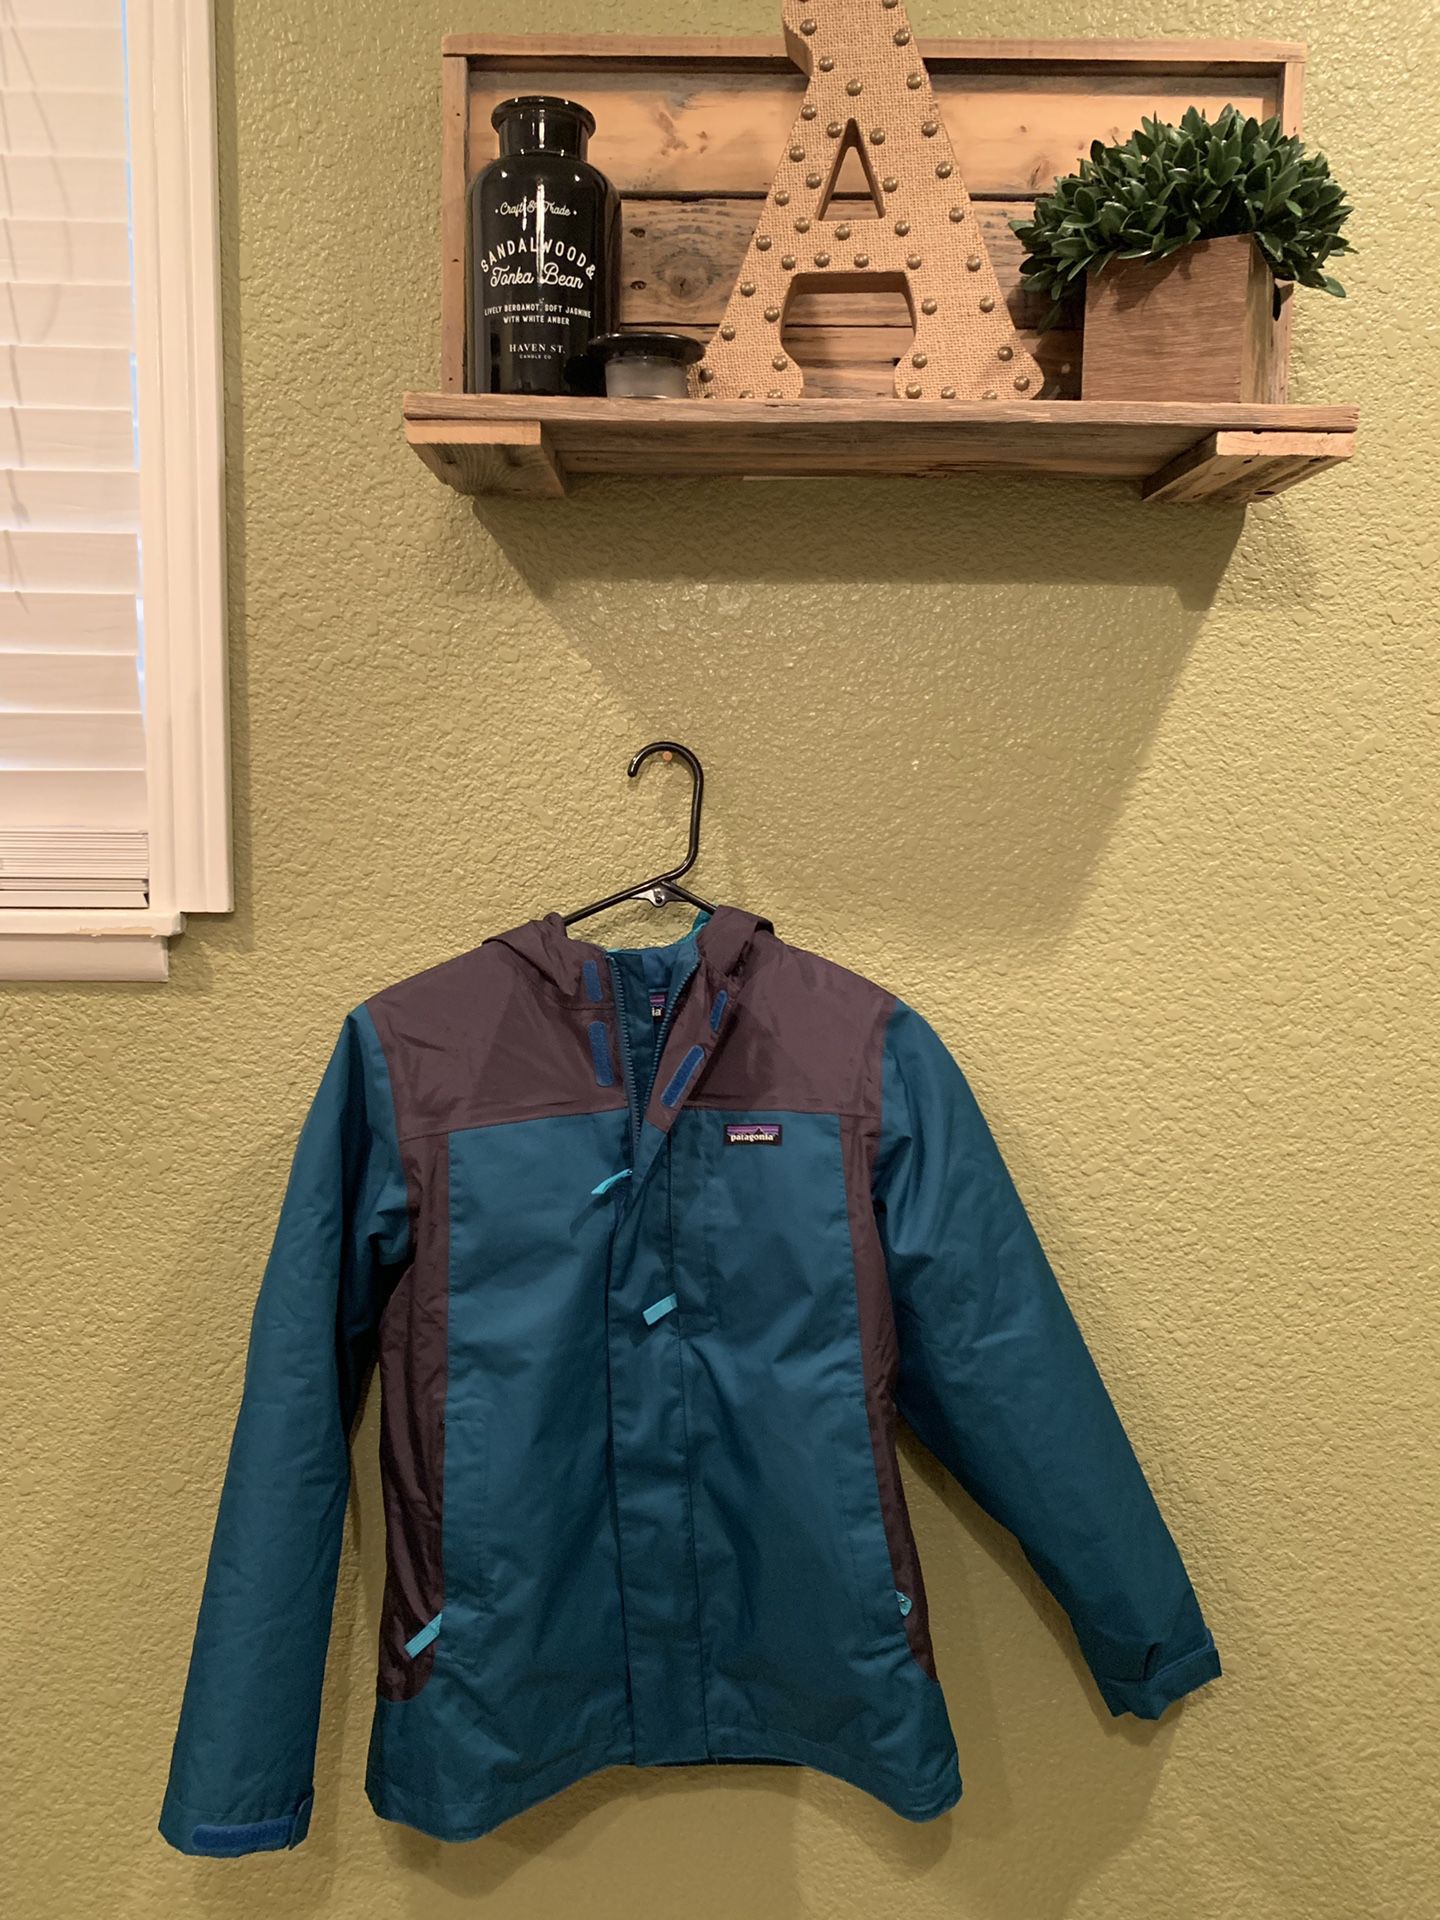 Patagonia Jacket Size Small (S) blue and gray ONLY WORN 5xs if that!!!! No tears, no rips, absolutely brand new!